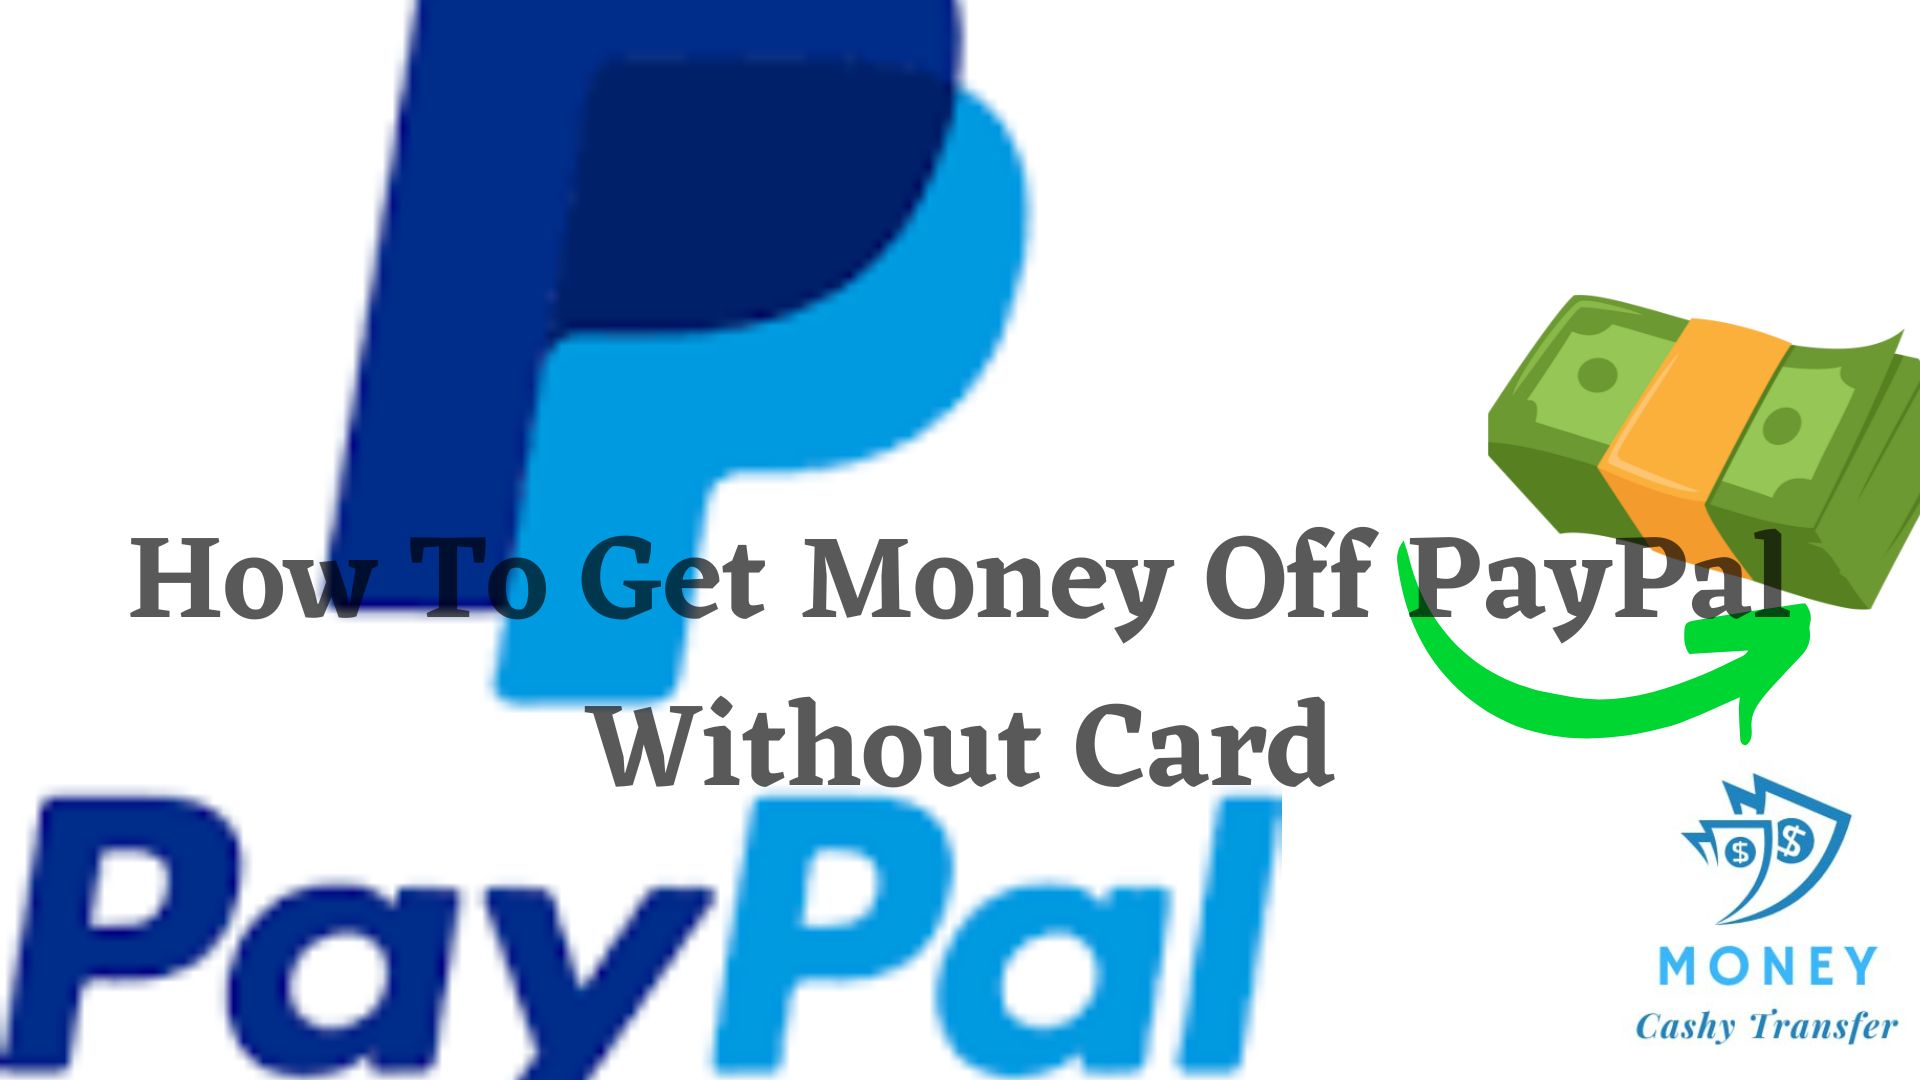 Get Money Off PayPal Without Card